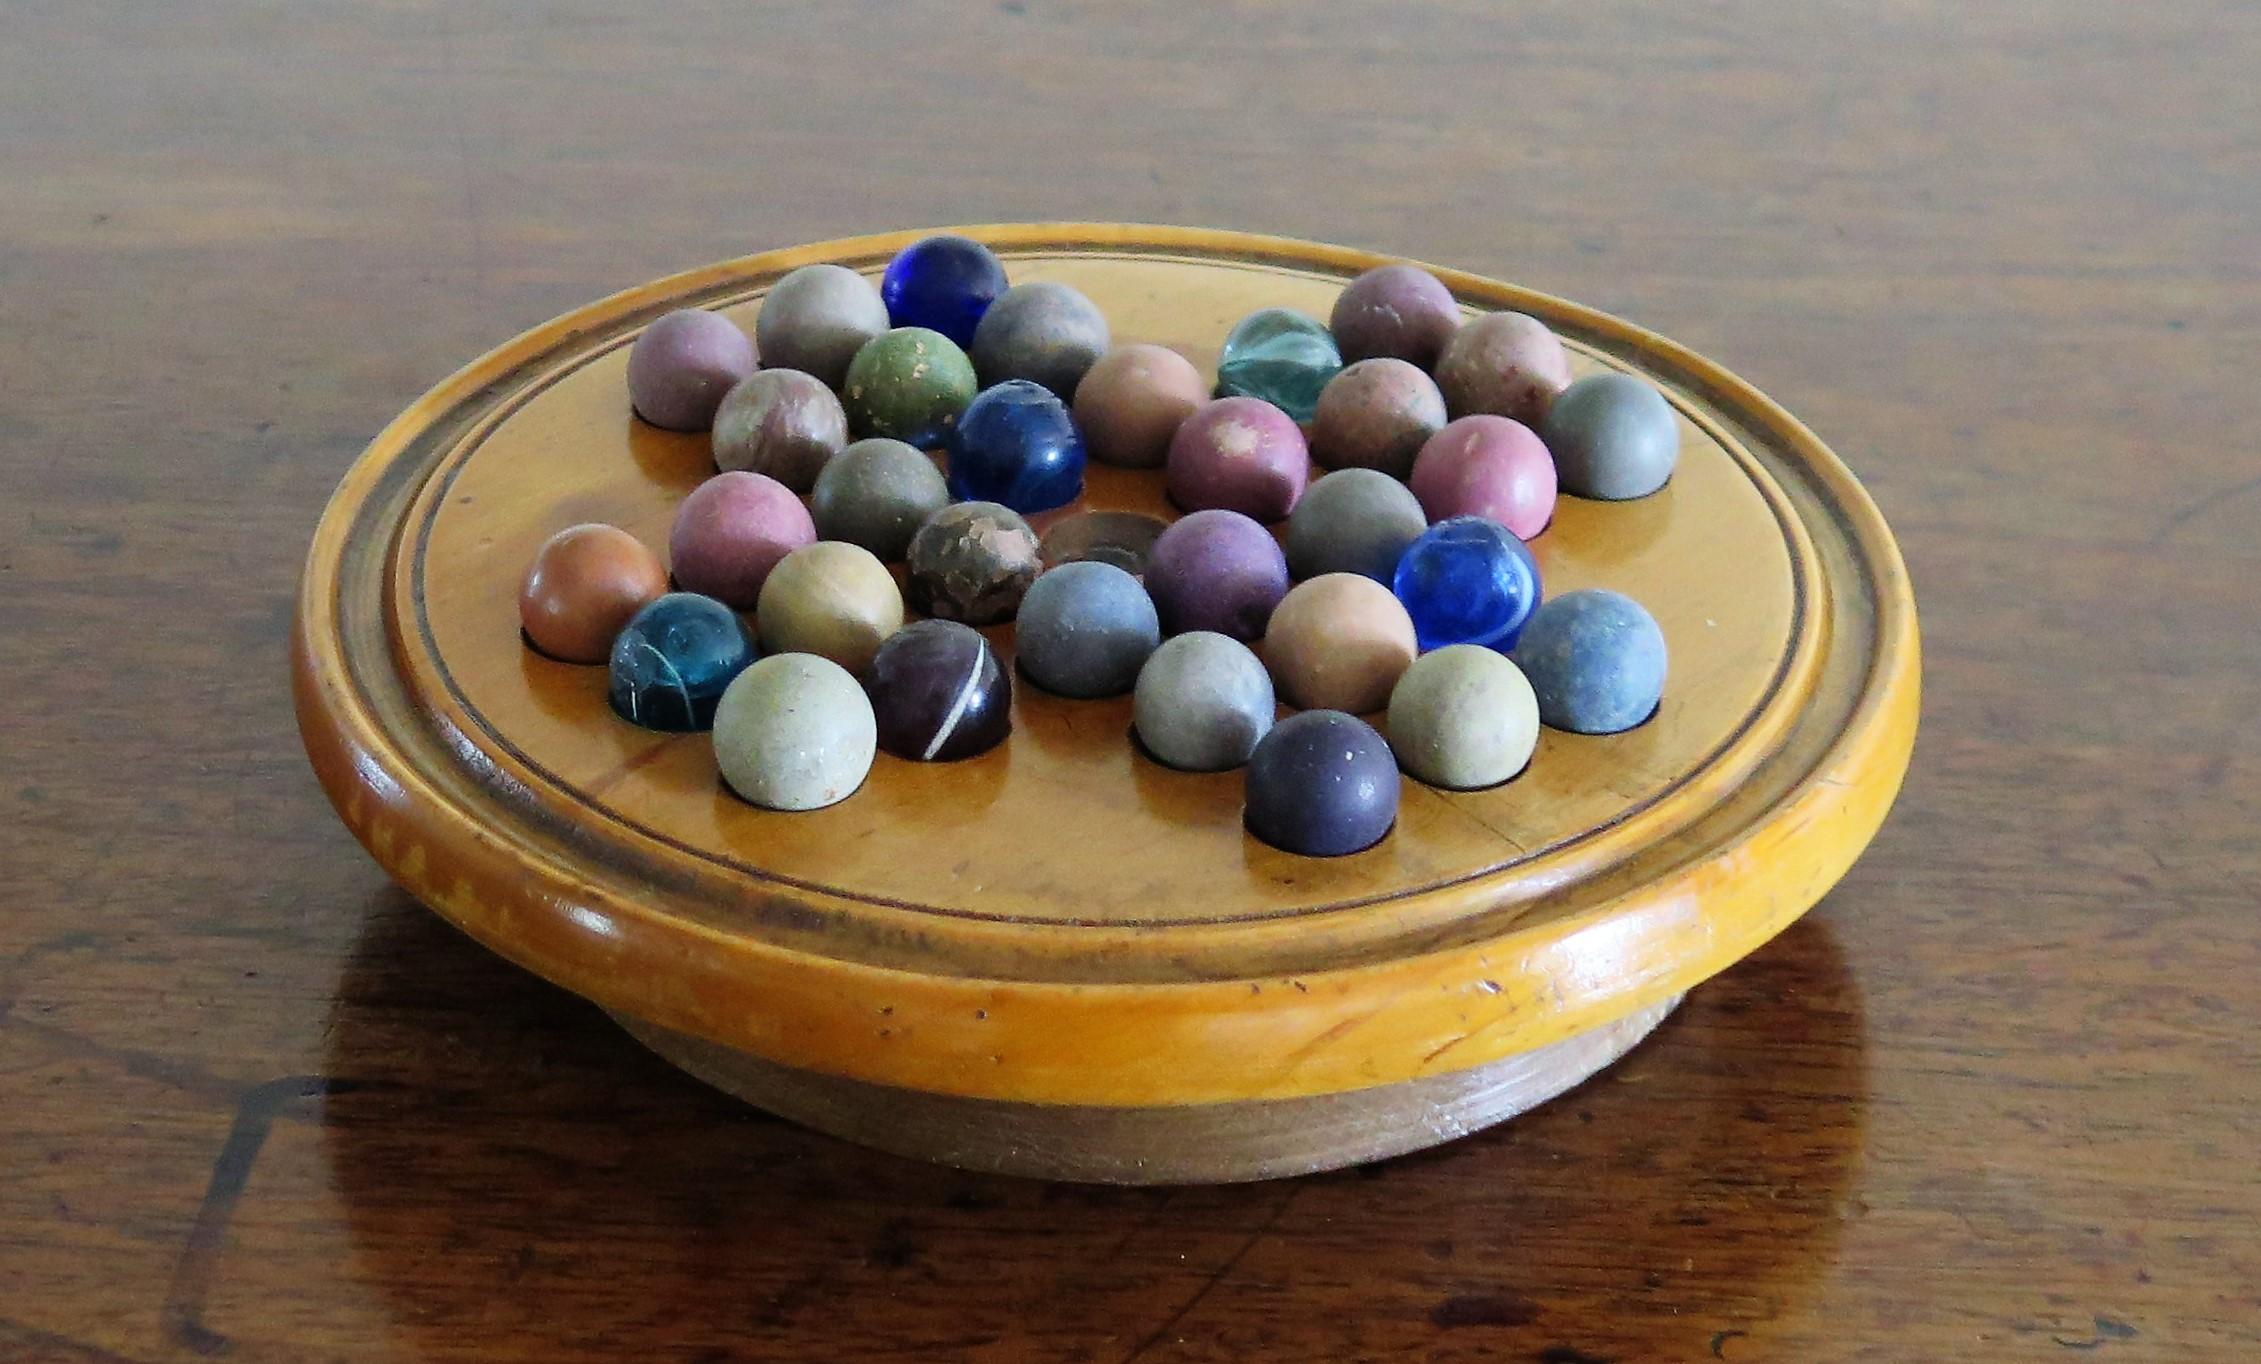 19th Century Travelling Marble Solitaire Board Game, with 32 Handmade Marbles 3